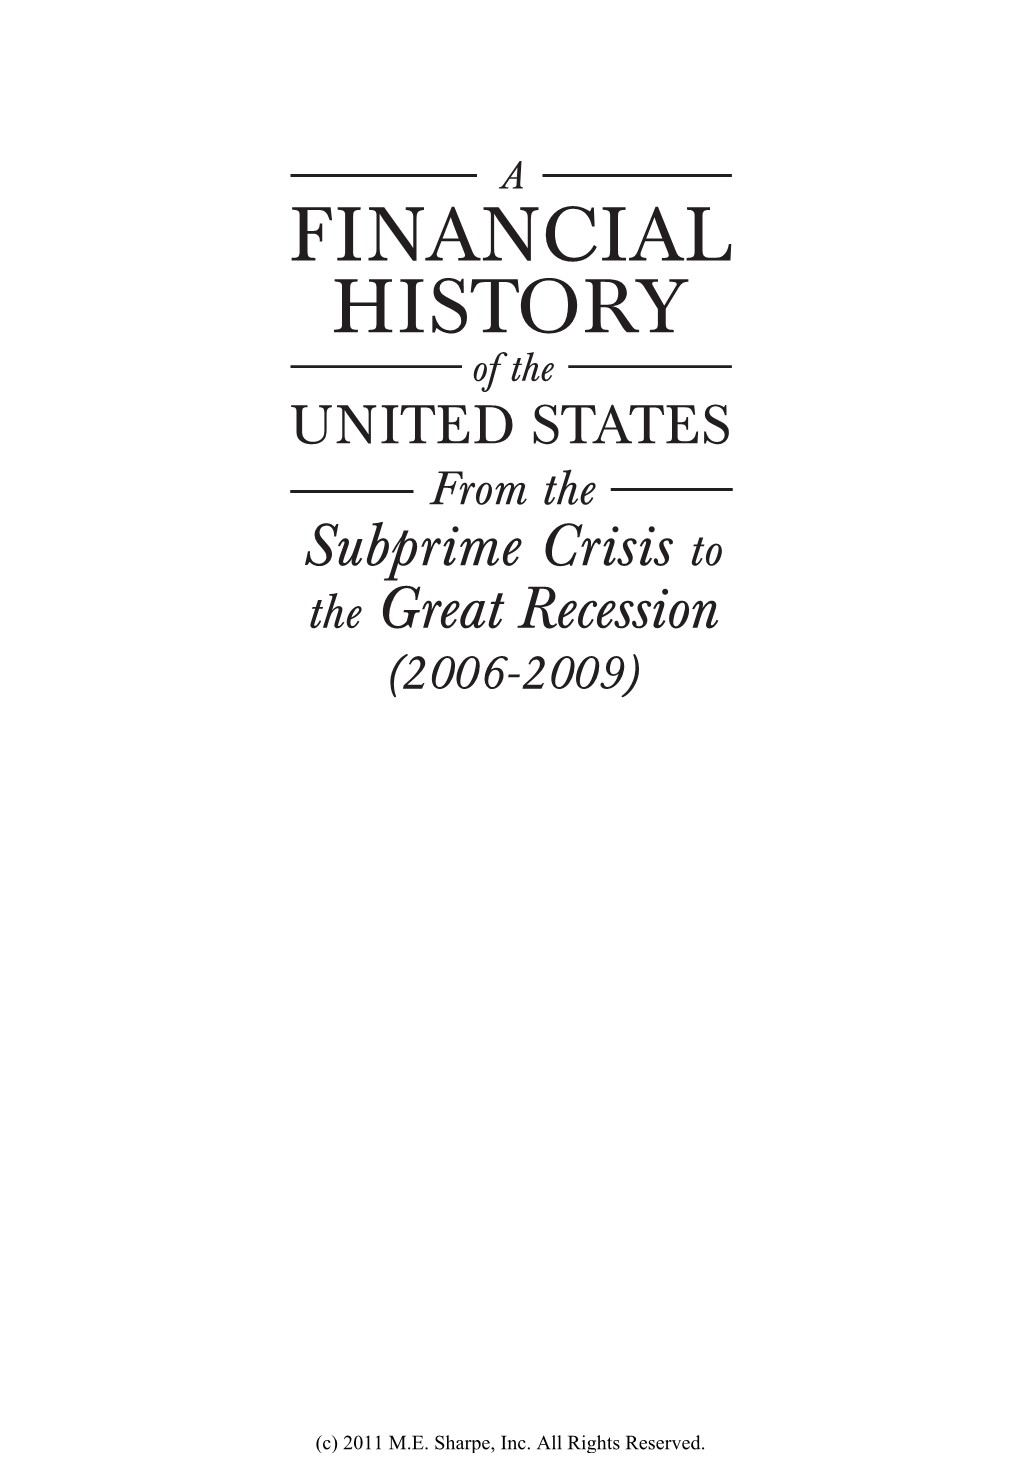 Financial History of the United States from the Subprime Crisis to the Great Recession (2006-2009)